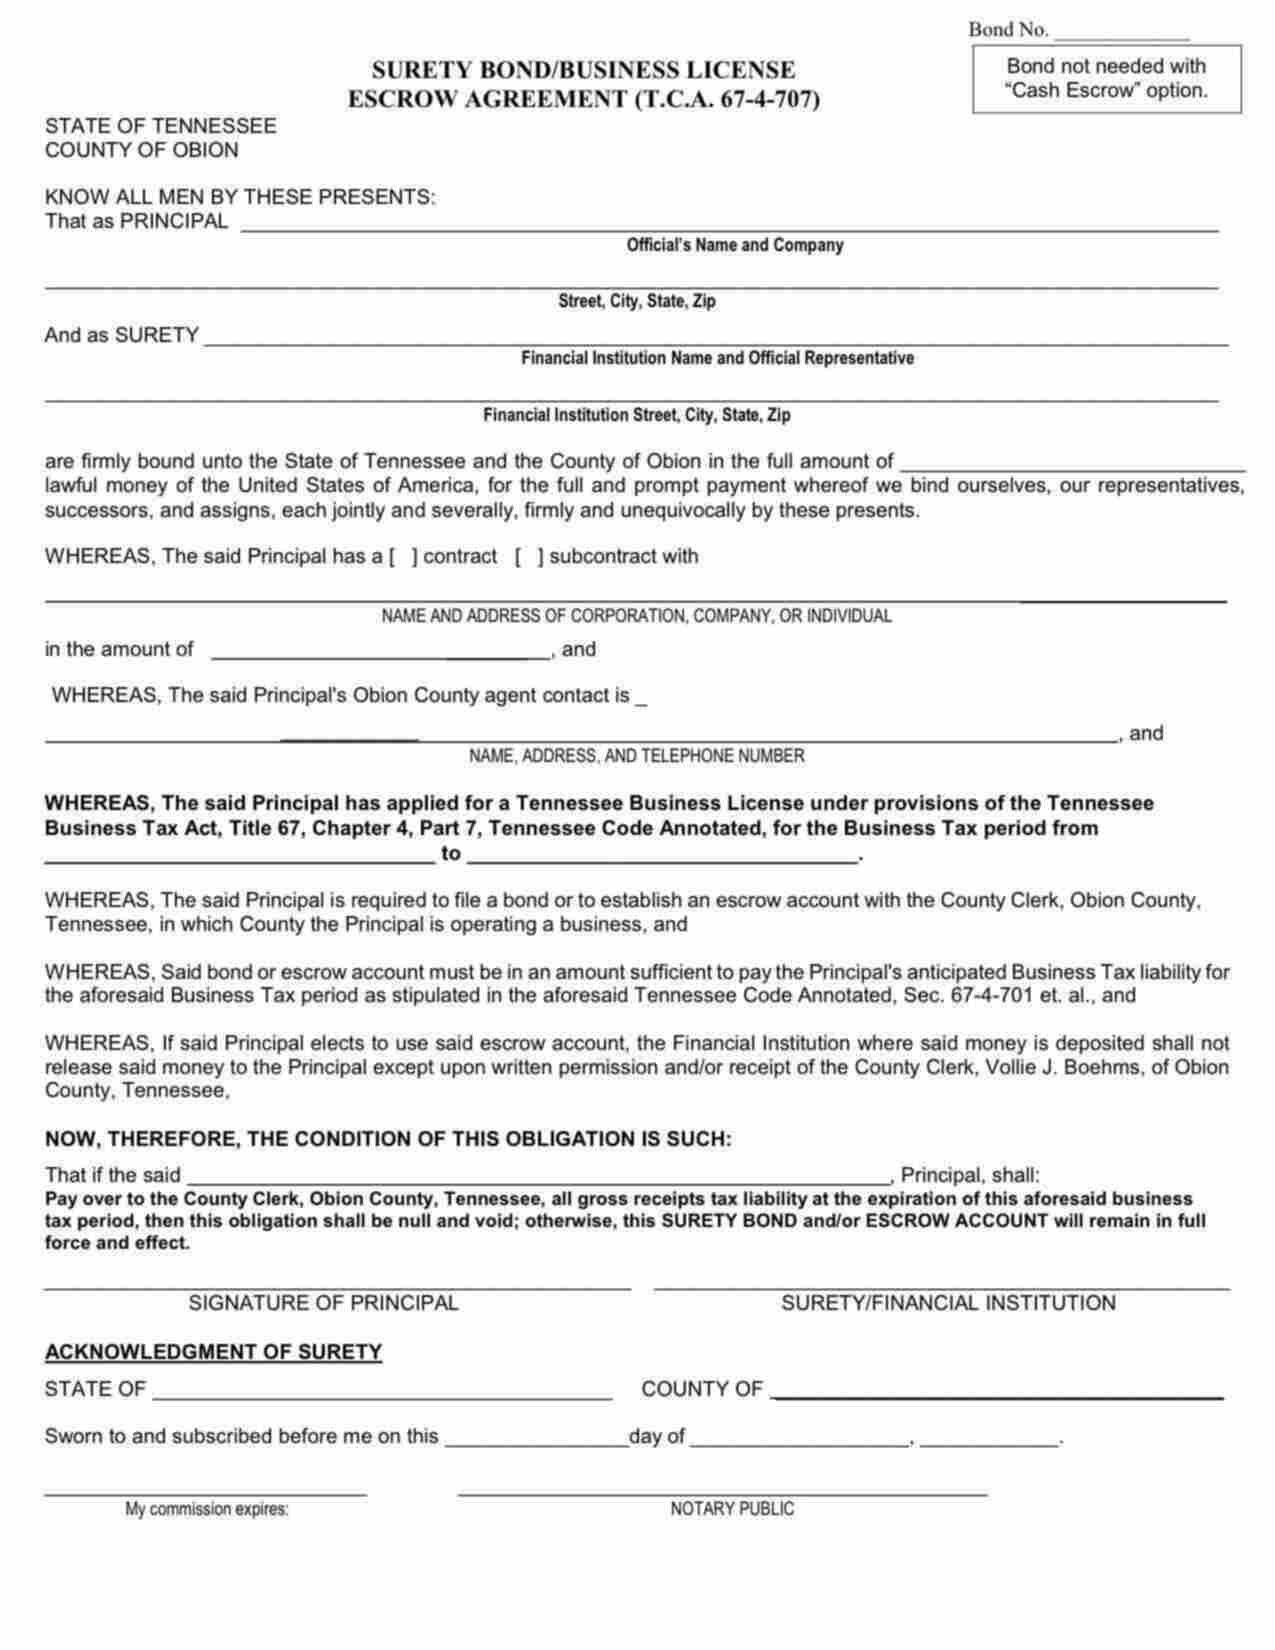 Tennessee Business License Escrow Agreement Bond Form